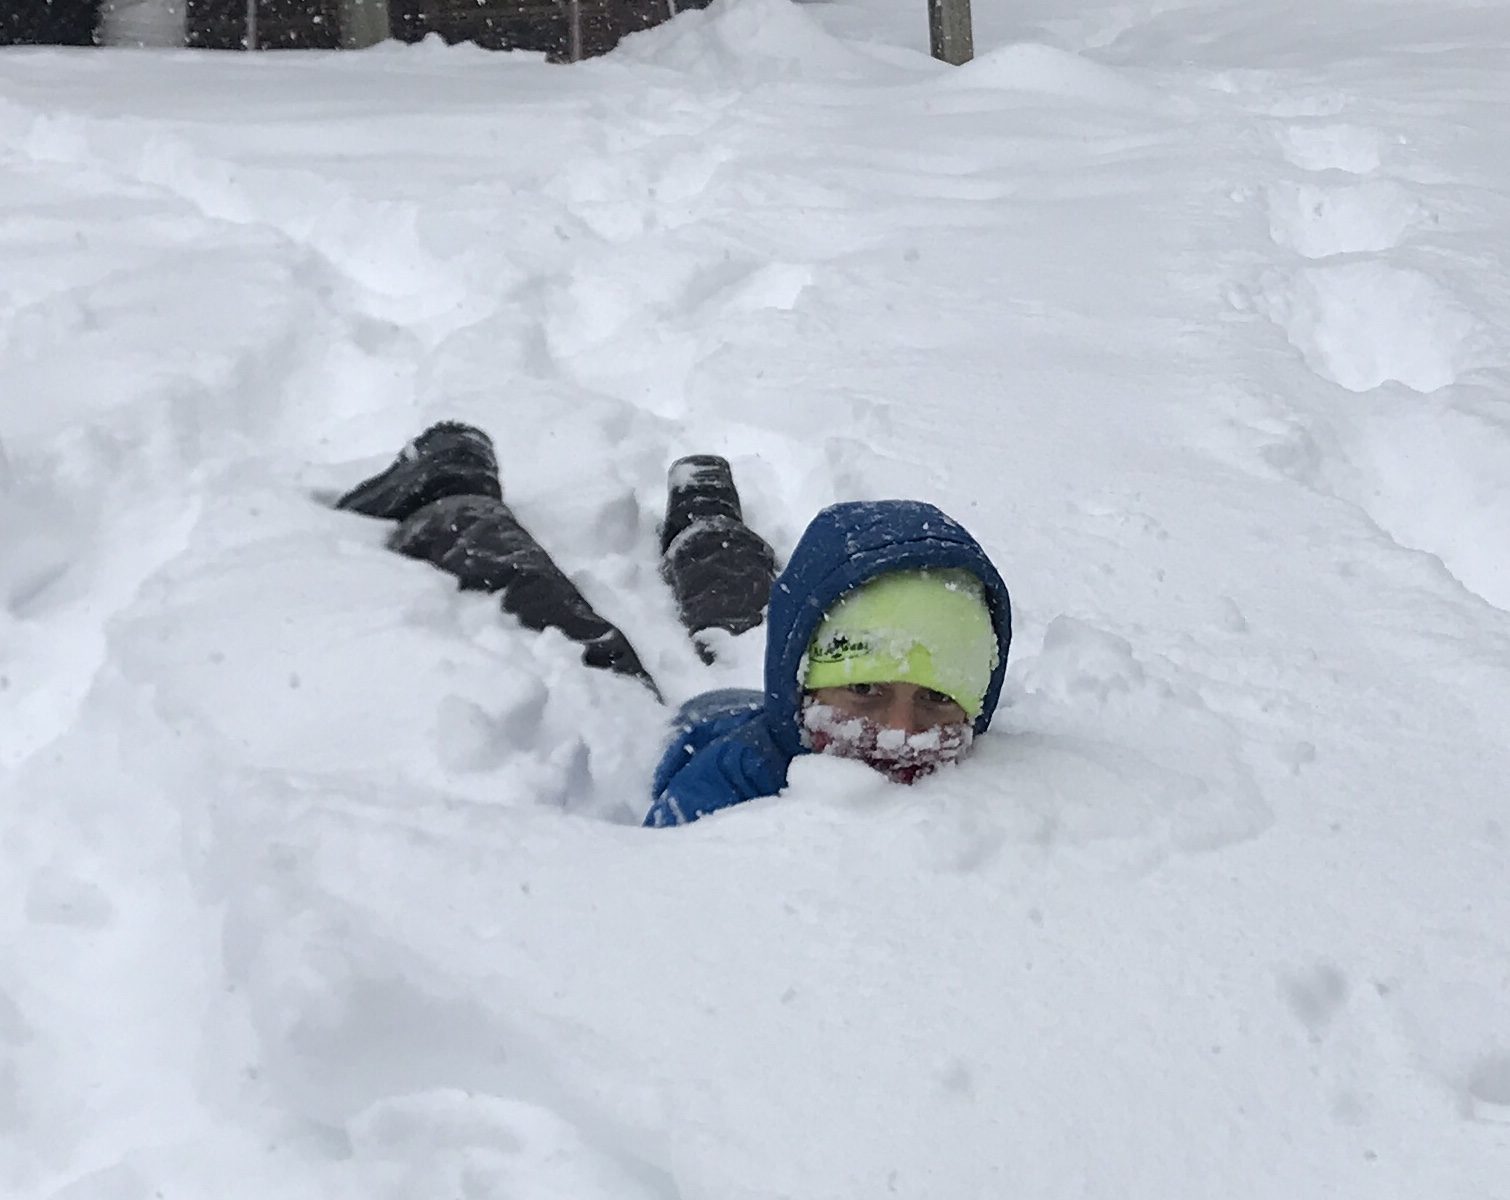 Child playing in deep snow. Child is wearing green hat,blue hooded parka, black snow pants, but because is prine, kid is partially hidden by snow.